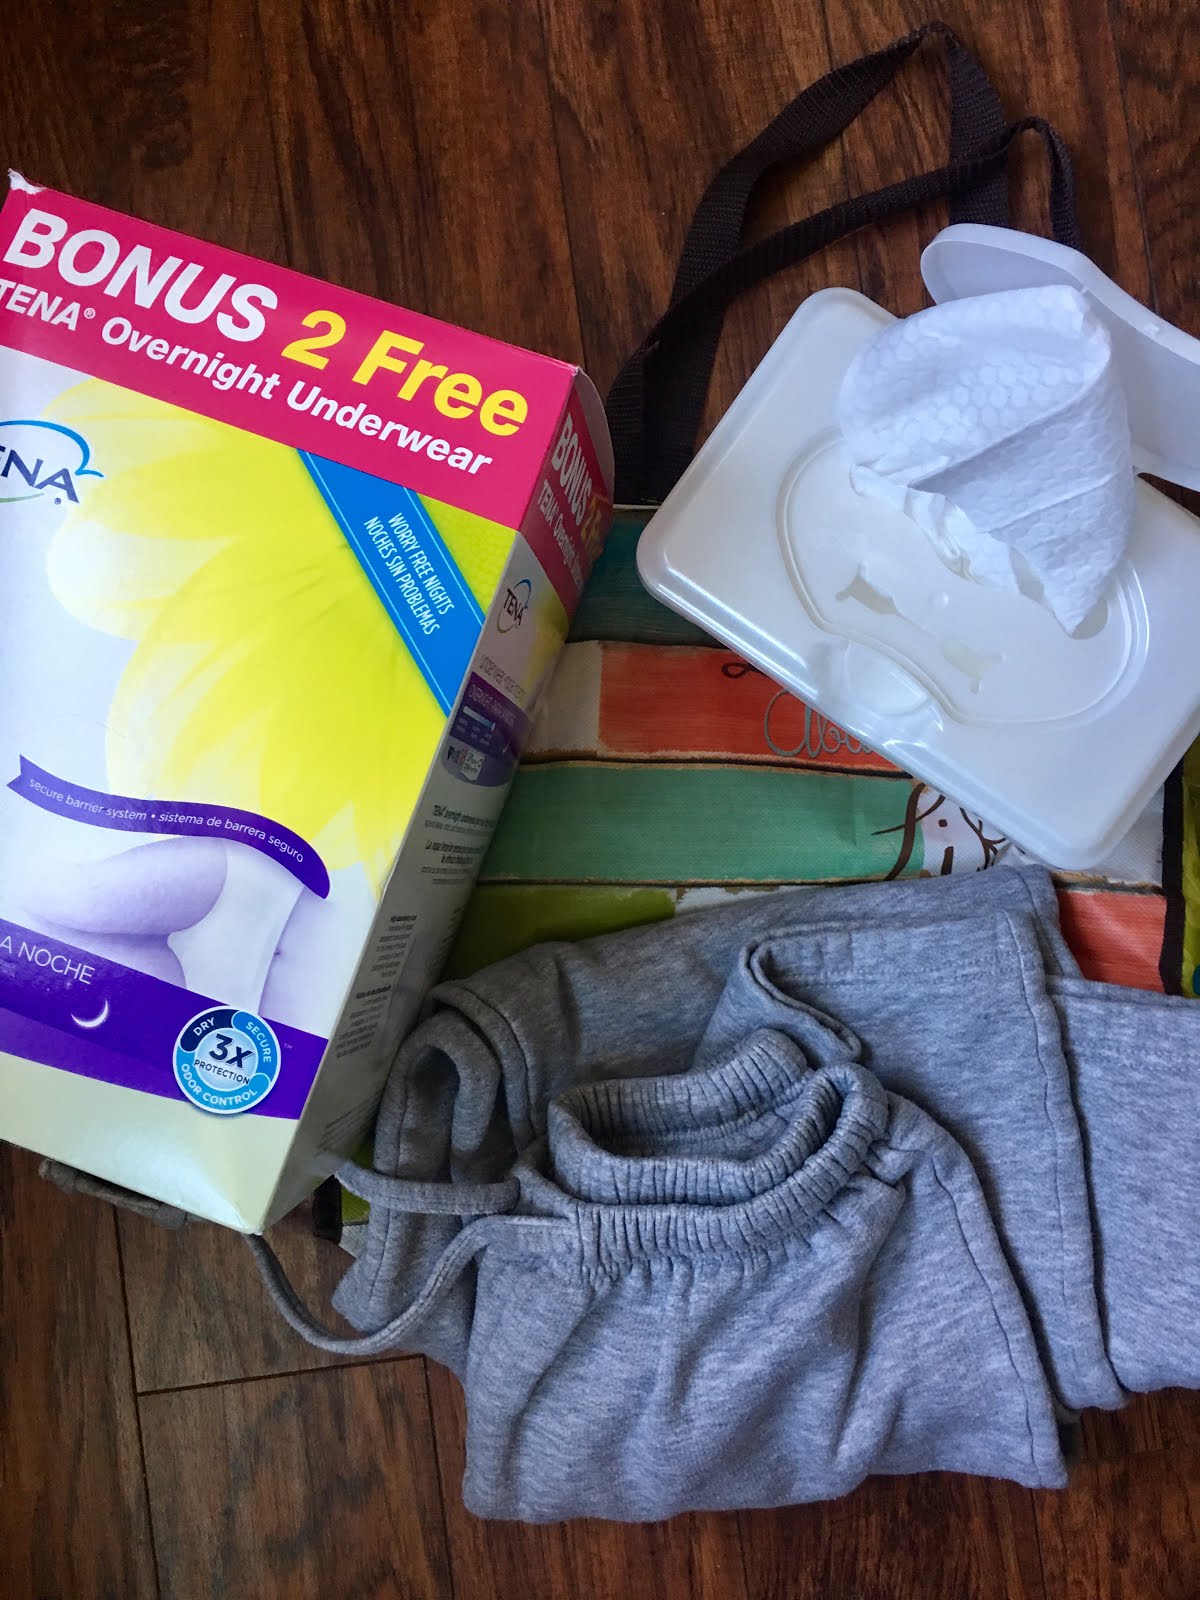 Three Items That Make Traveling with My Mother-In-Law Easier with TENA® -  The Kitchen Wife